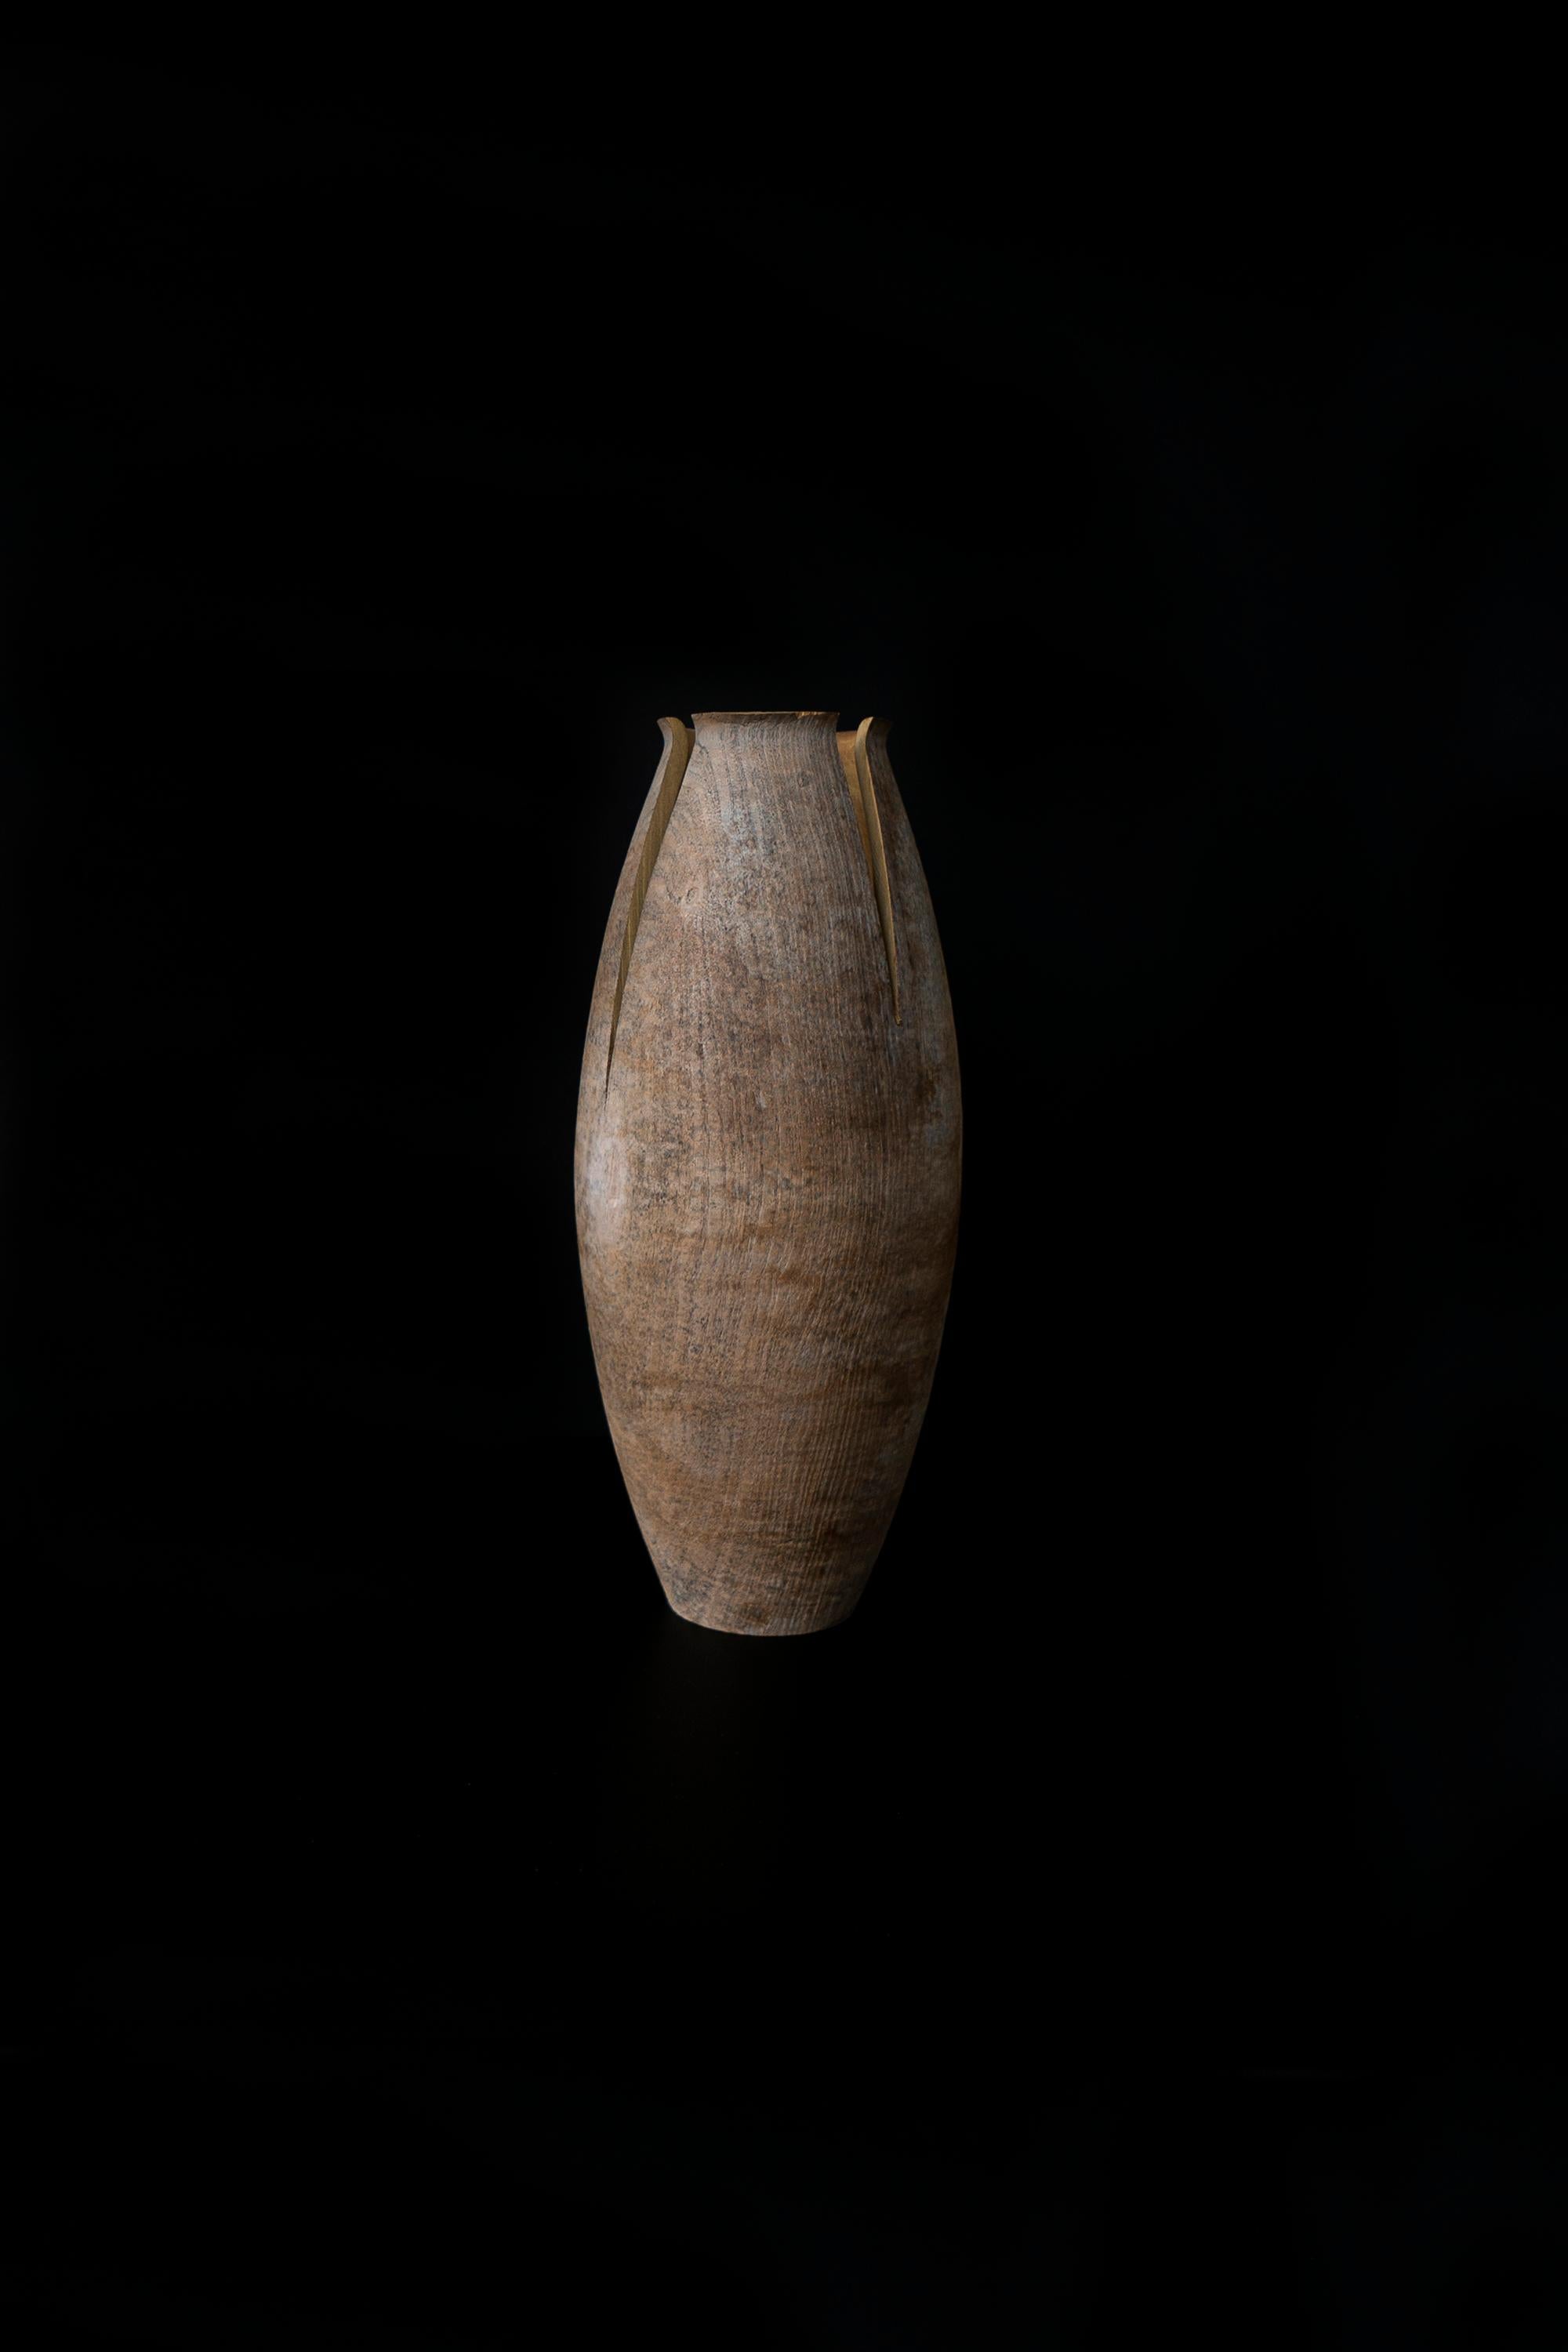 Tomahawk is an essential yet beautiful vase made of mulberry wood stained with a titanium oxide-based finish. 
The simple shape is split by an ax blow that characterizes the image. This vase comes in three different shapes, designed by the Italian